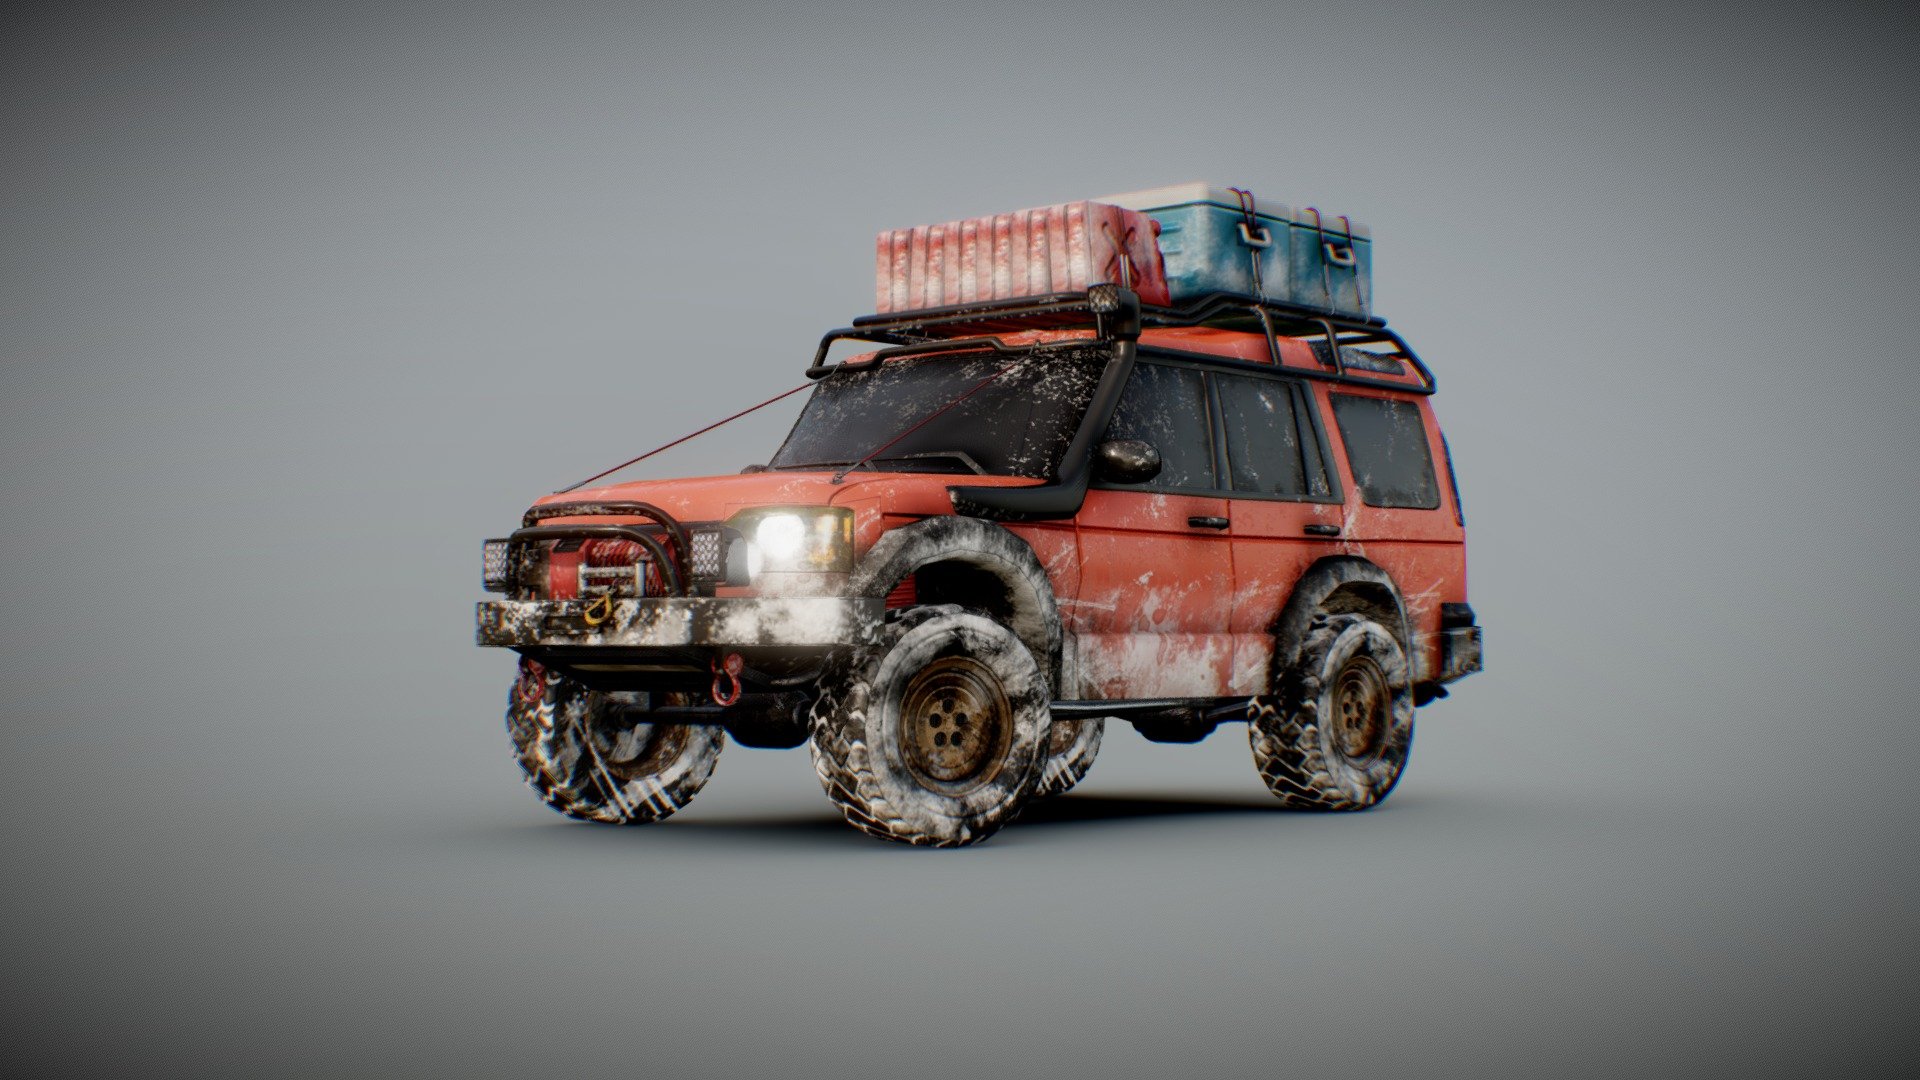 Few days ago i was driving and in front of me i had a land rover discovery and i liked it so when i was home i told myself, why not medelling it? and that's the result. A low poly Model of a 2004 Land Rover Discovery at the end it turned out as an offroad version based on some pics found on google - 2004 Land Rover Discovery Off-Road - 3D model by Soas1 (@soasone95) 3d model